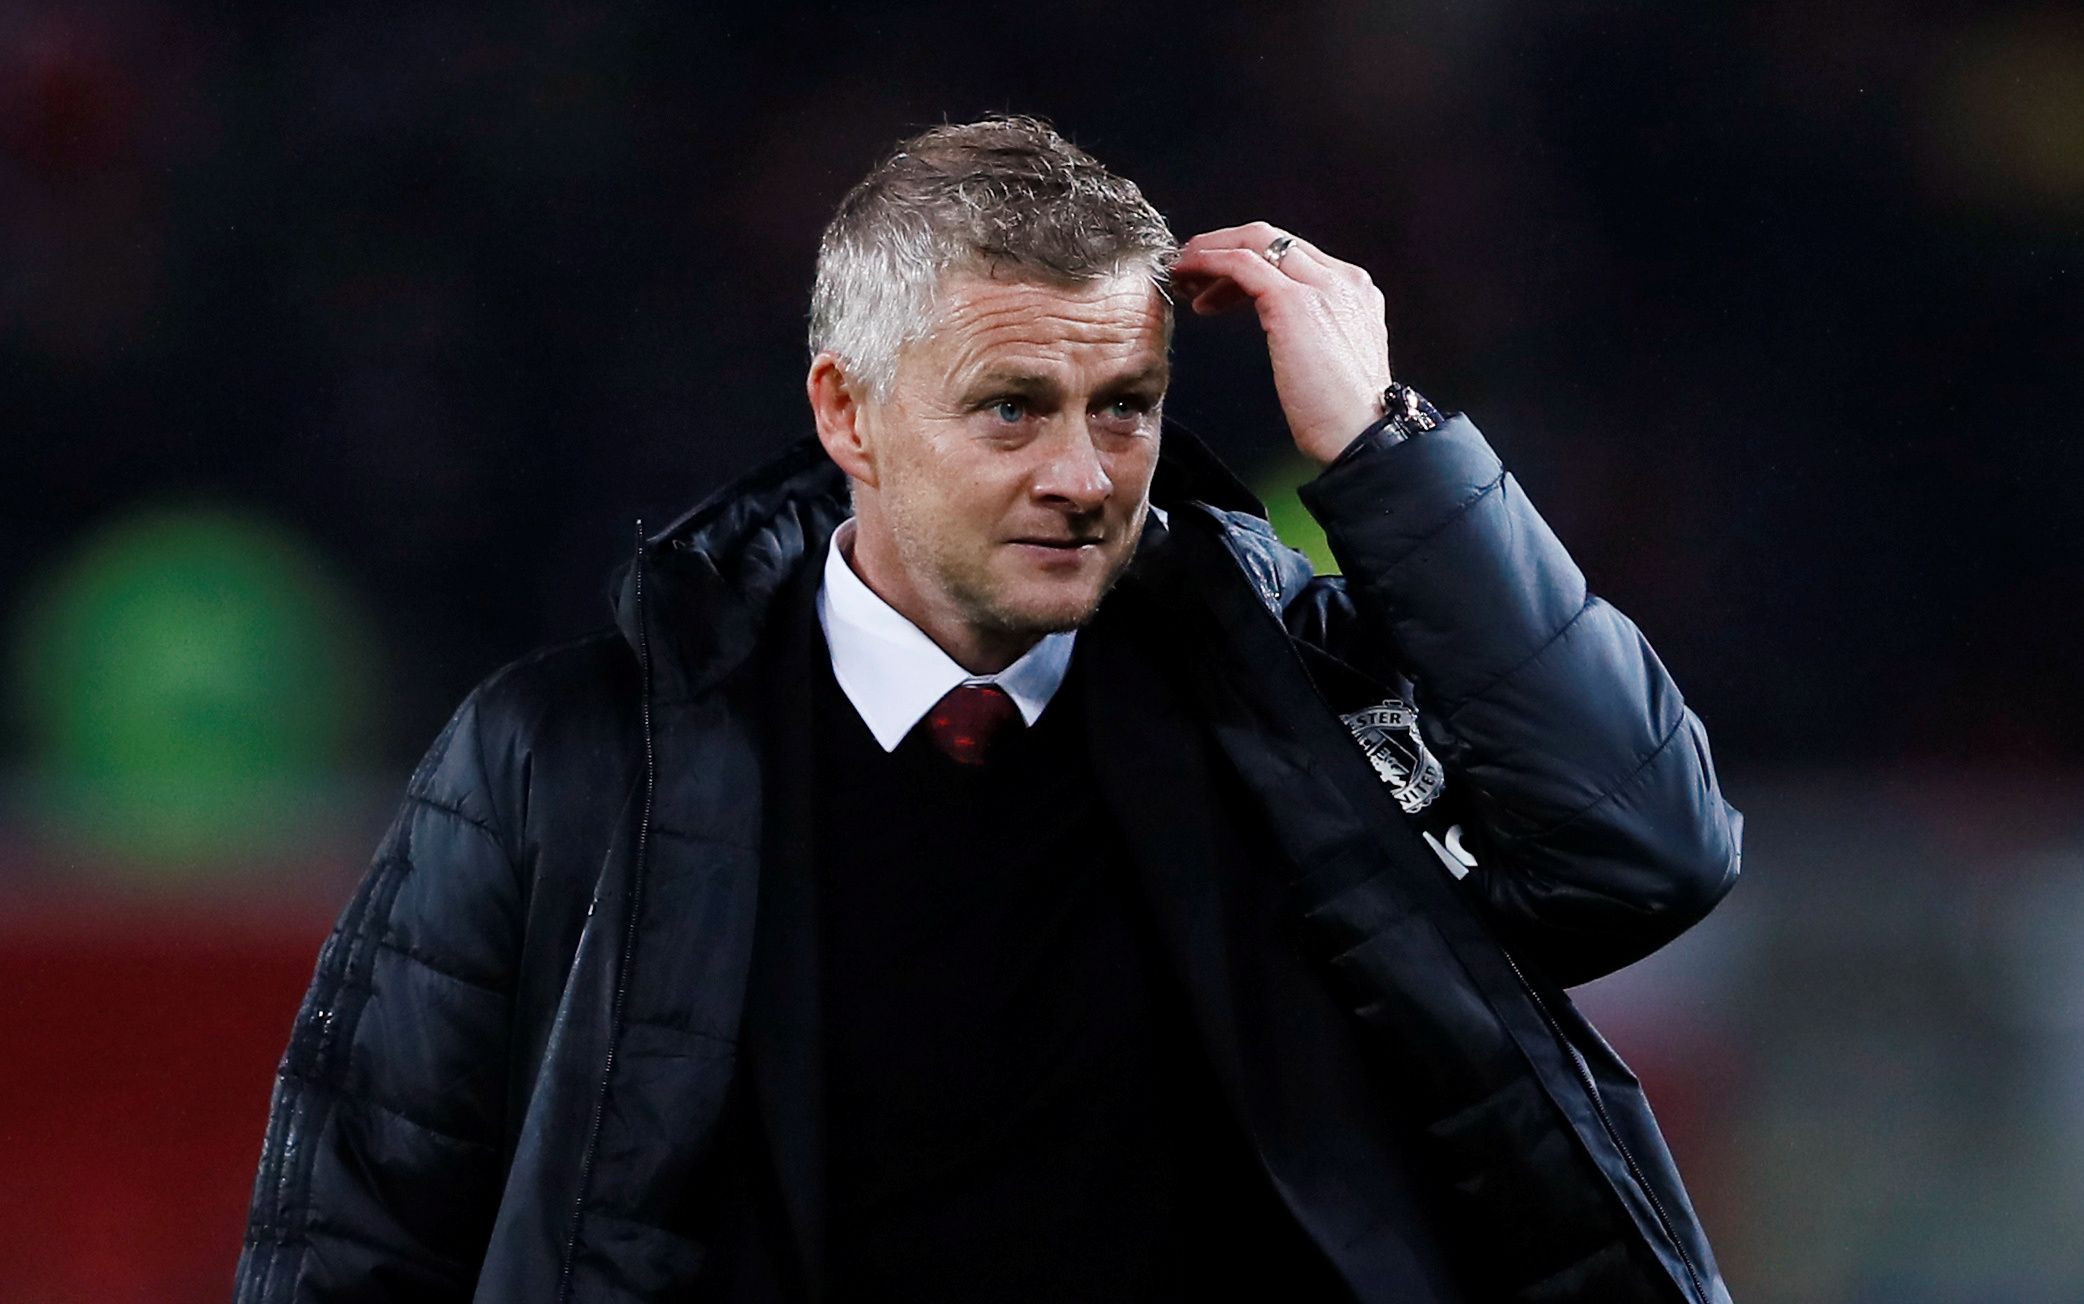 Soccer Football - Premier League - Manchester United v Arsenal - Old Trafford, Manchester, Britain - September 30, 2019   Manchester United manager Ole Gunnar Solskjaer reacts at the end of the match    Action Images via Reuters/Jason Cairnduff    EDITORIAL USE ONLY. No use with unauthorized audio, video, data, fixture lists, club/league logos or 